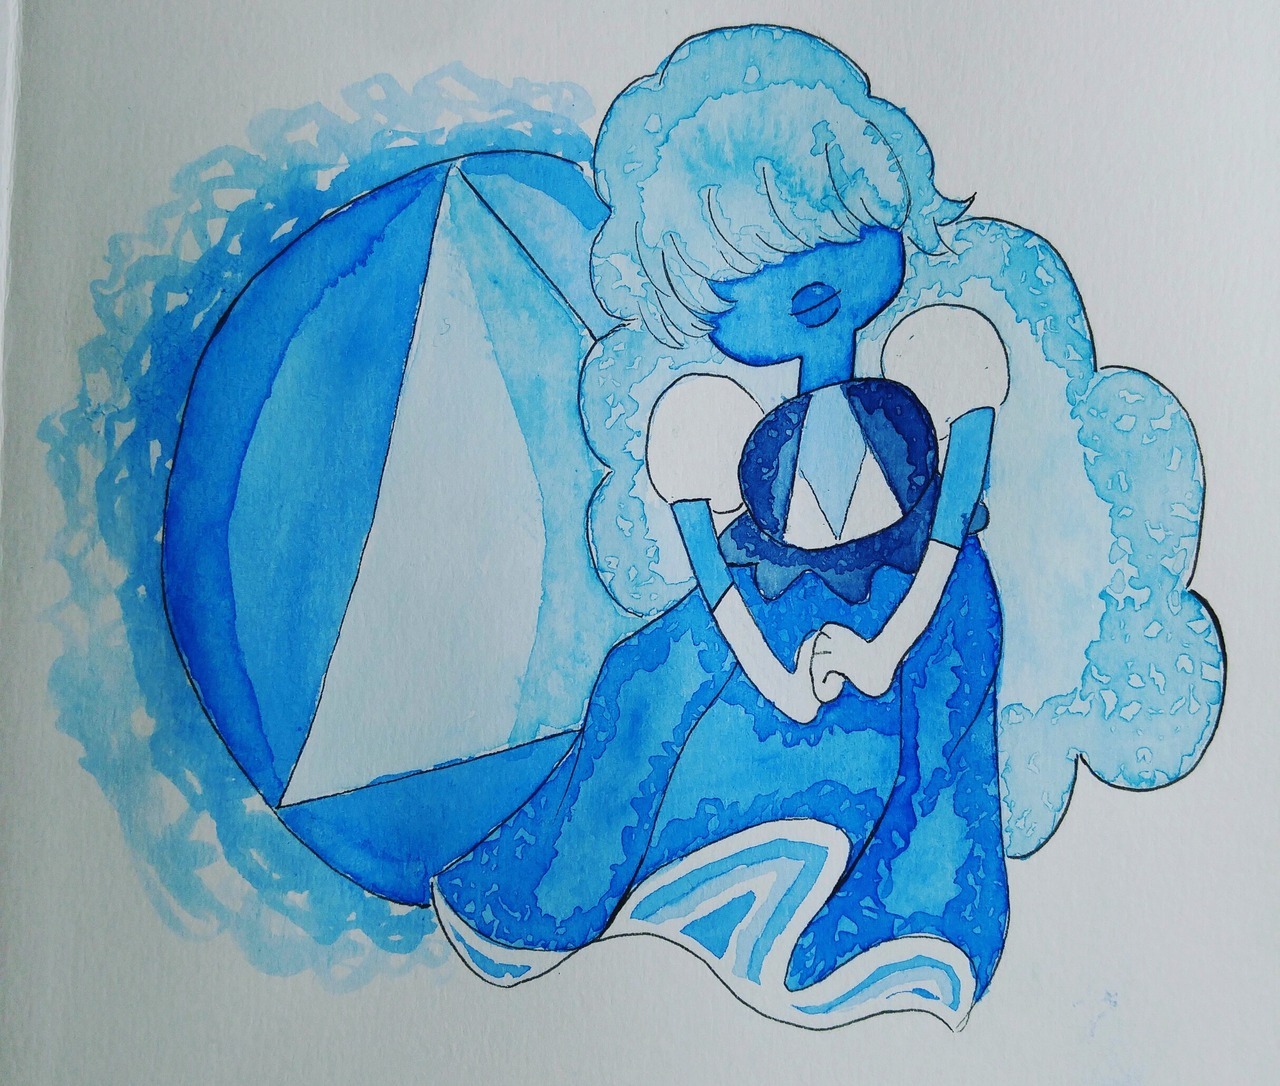 Watercolors are my everything right now Also I love me some Sapphire